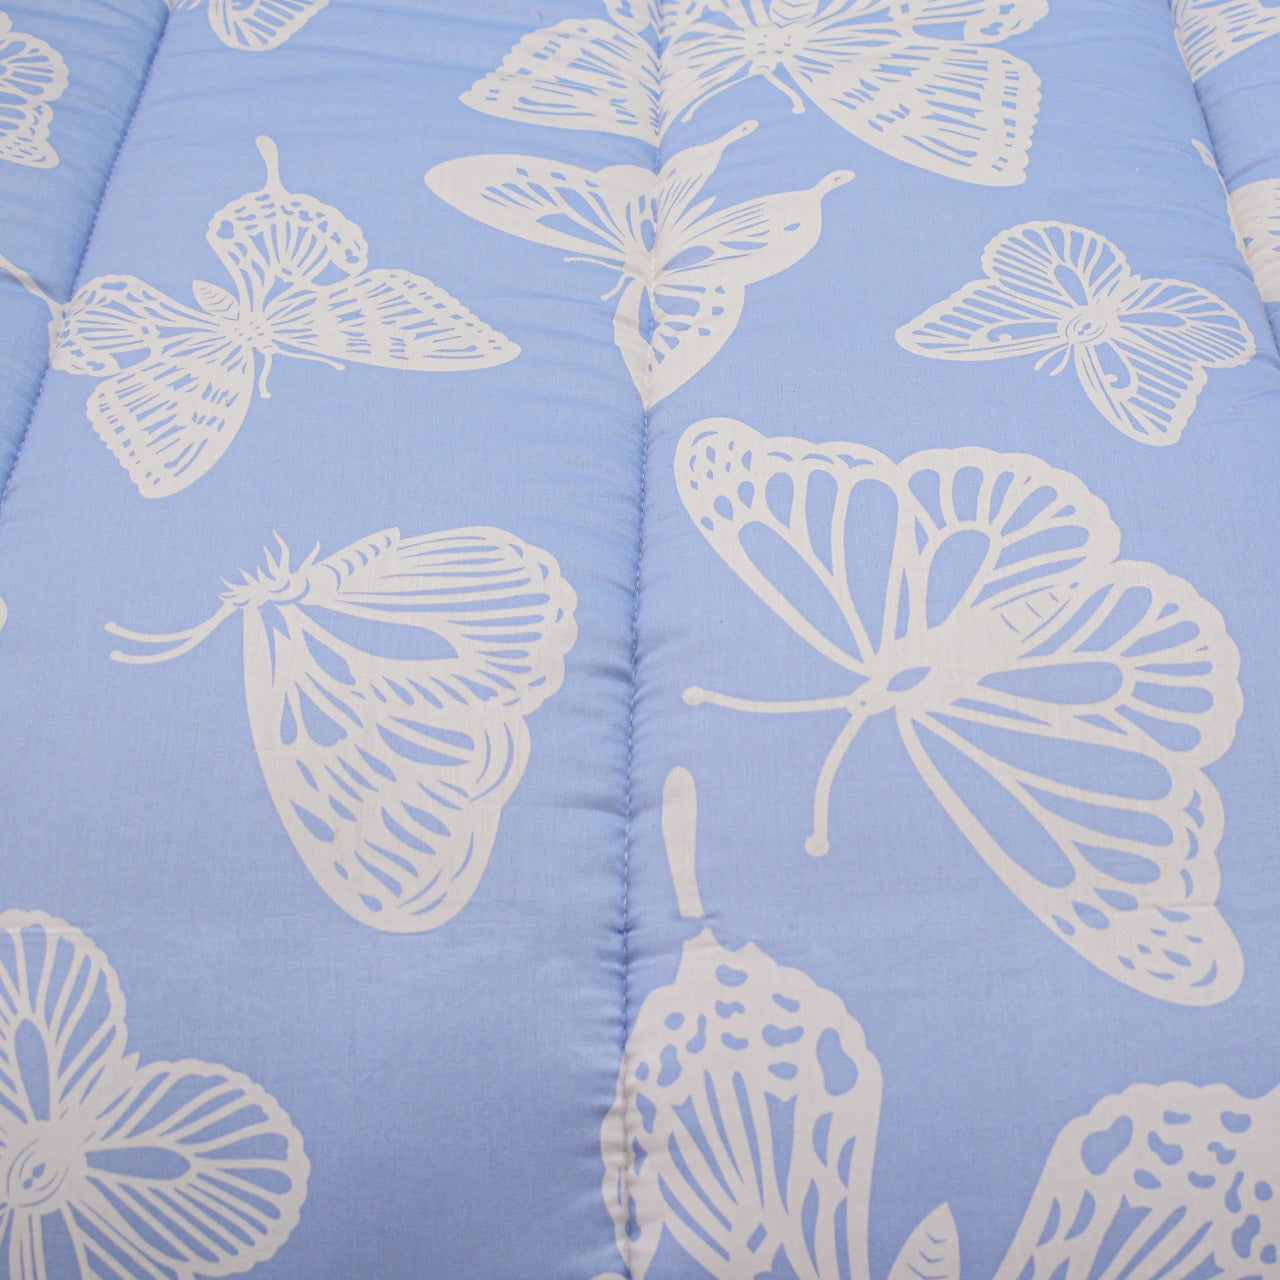 4 Pcs. Printed Comforter set (Butterfly)